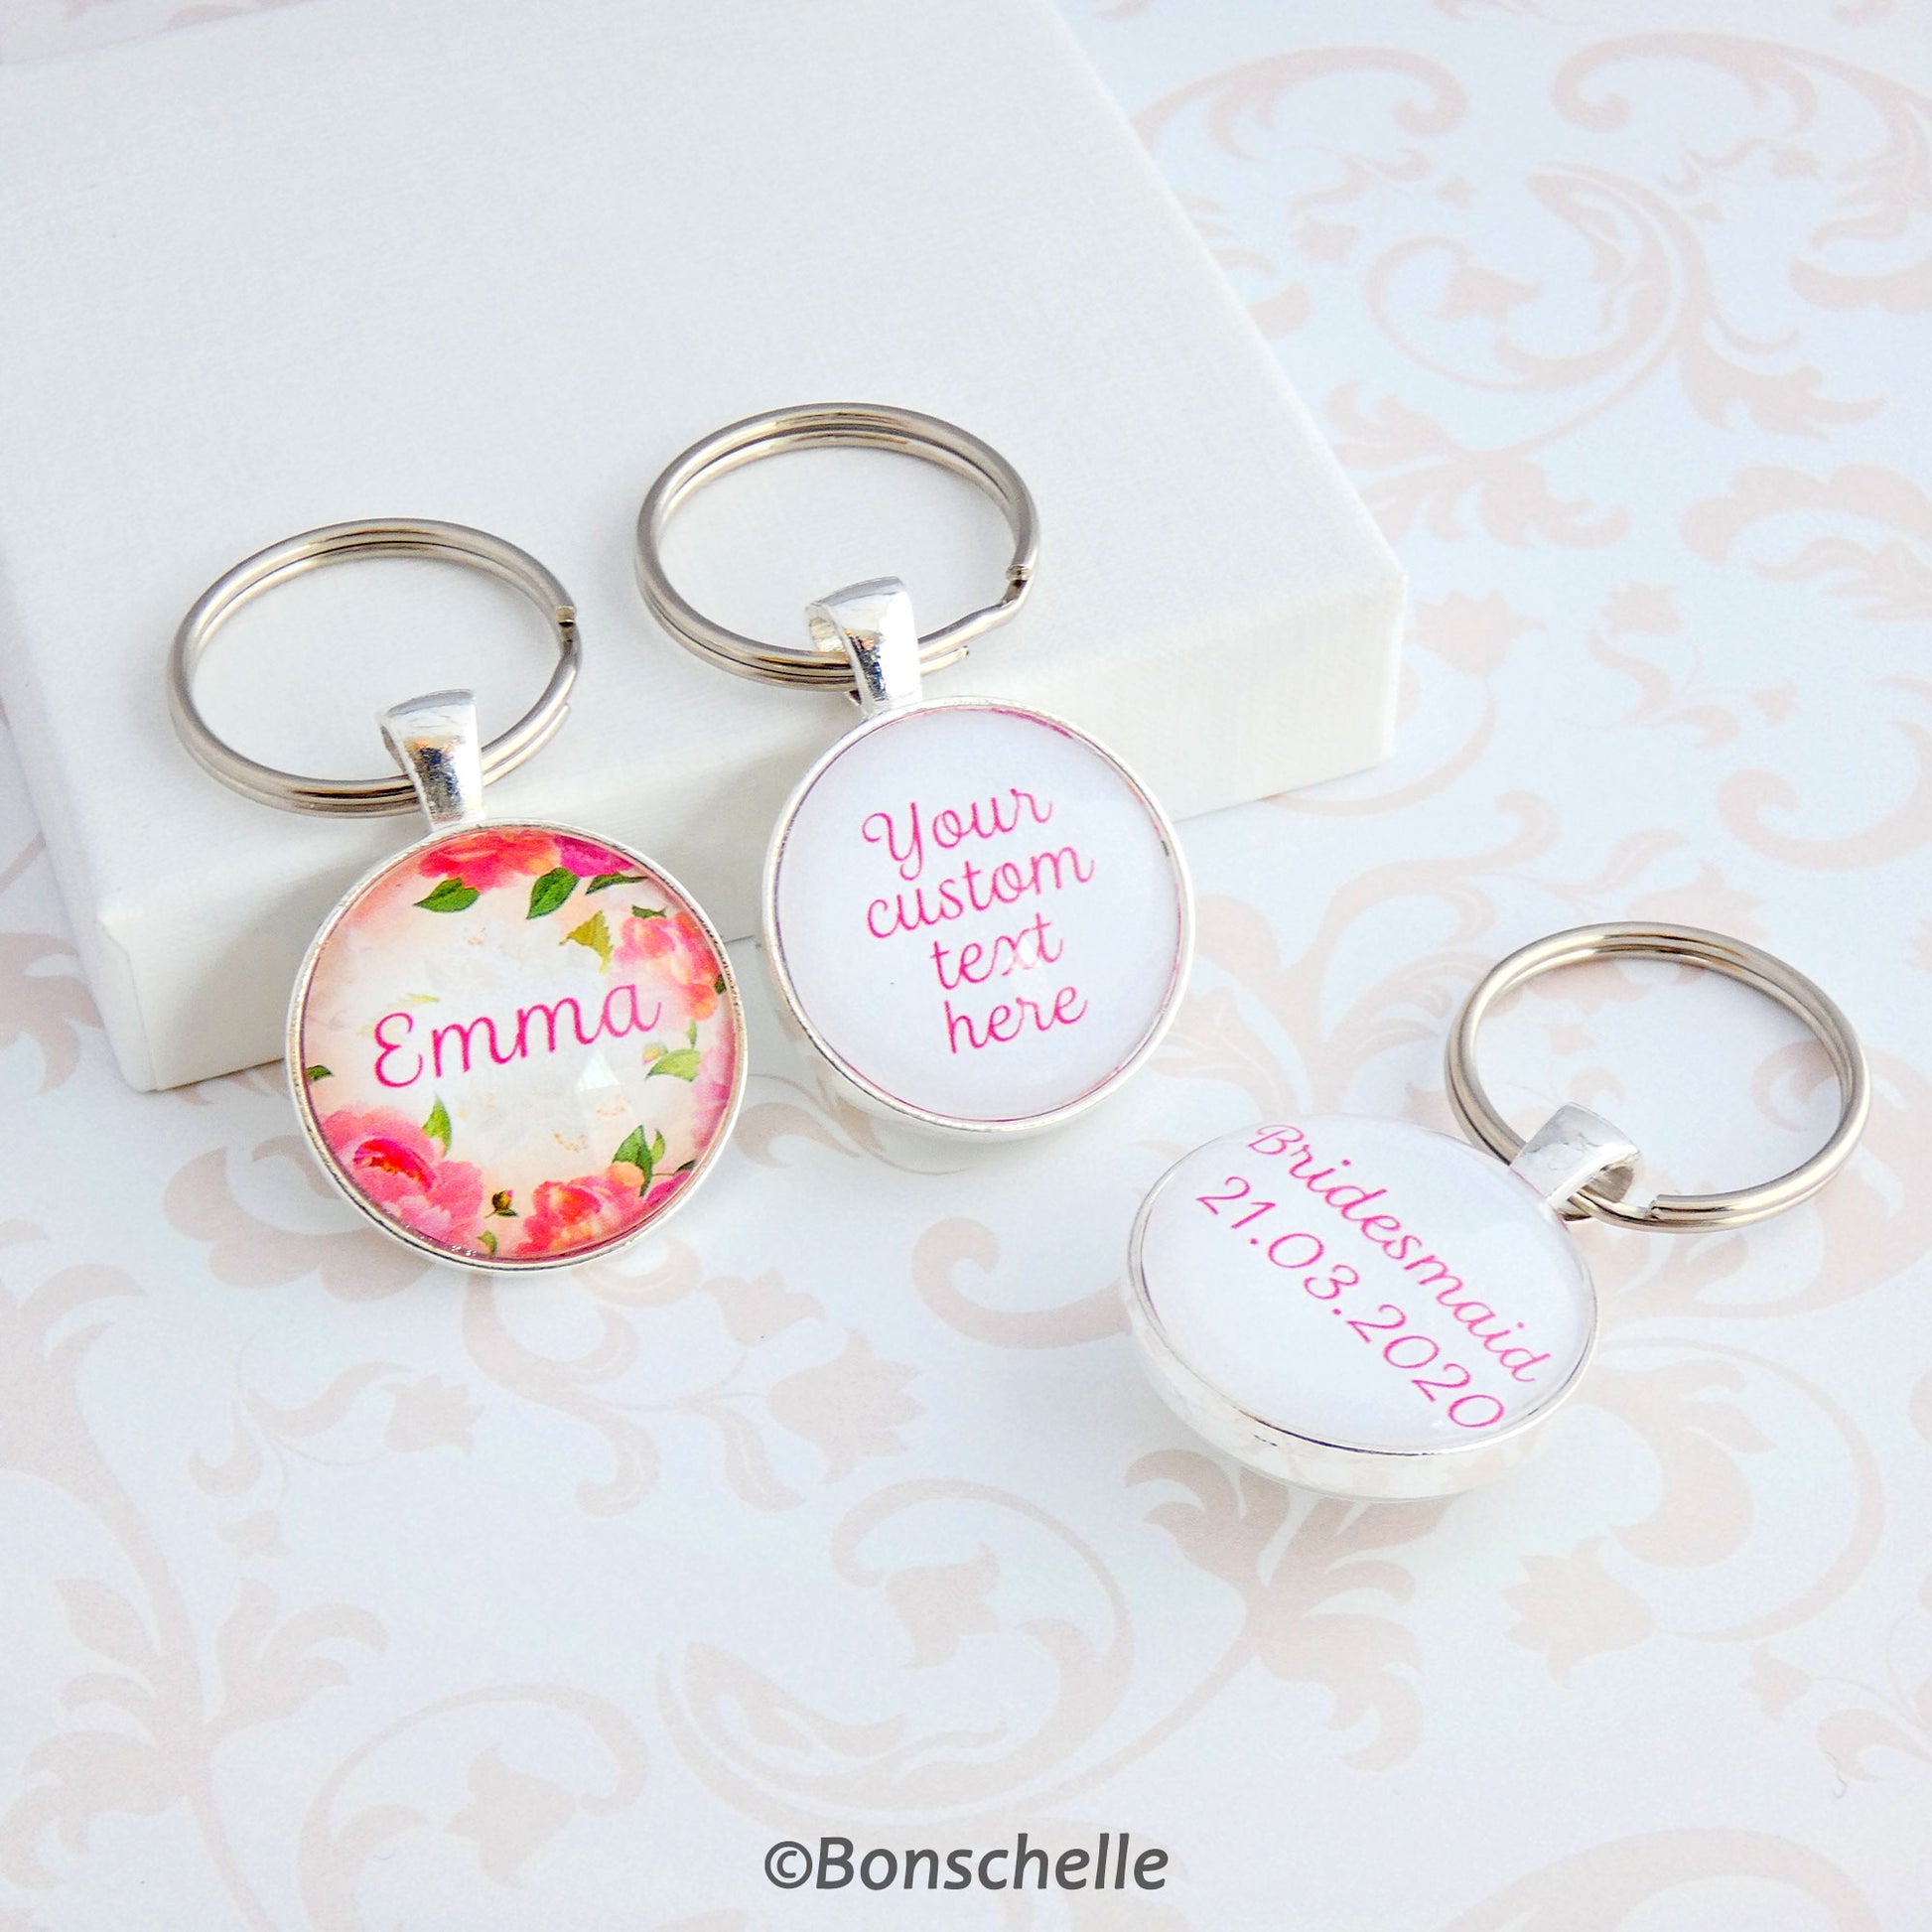 Double sided silver toned round keyring with a name and floral design on the front and your custom text on the back showing an additonal example of text on the back.